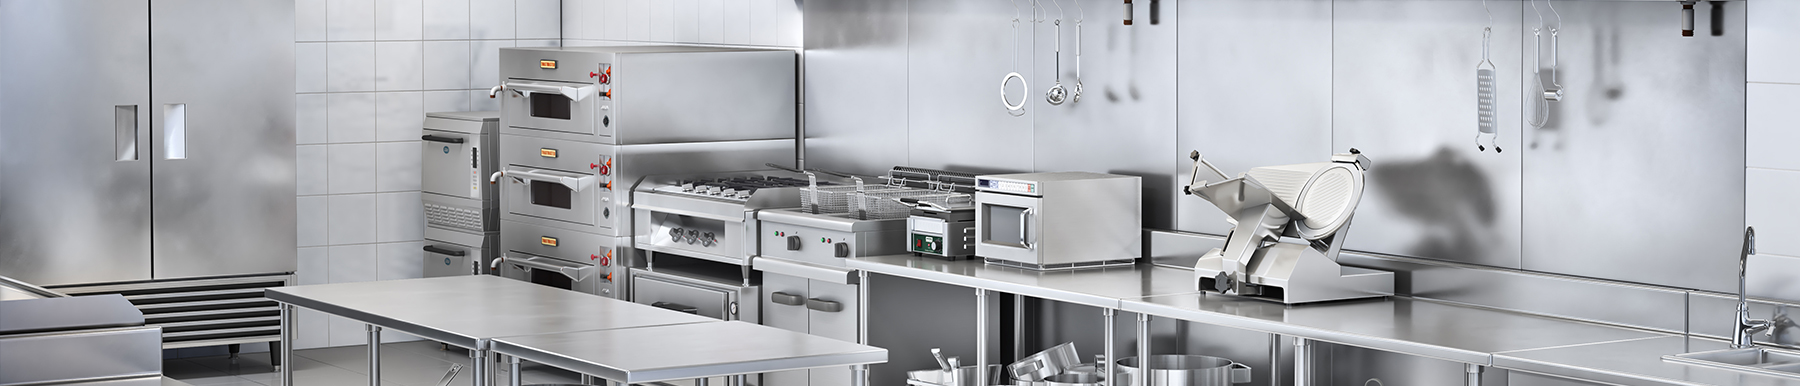 Catering Equipment Suppliers Near Fife | H2 Catering Equipment Catering Equipment